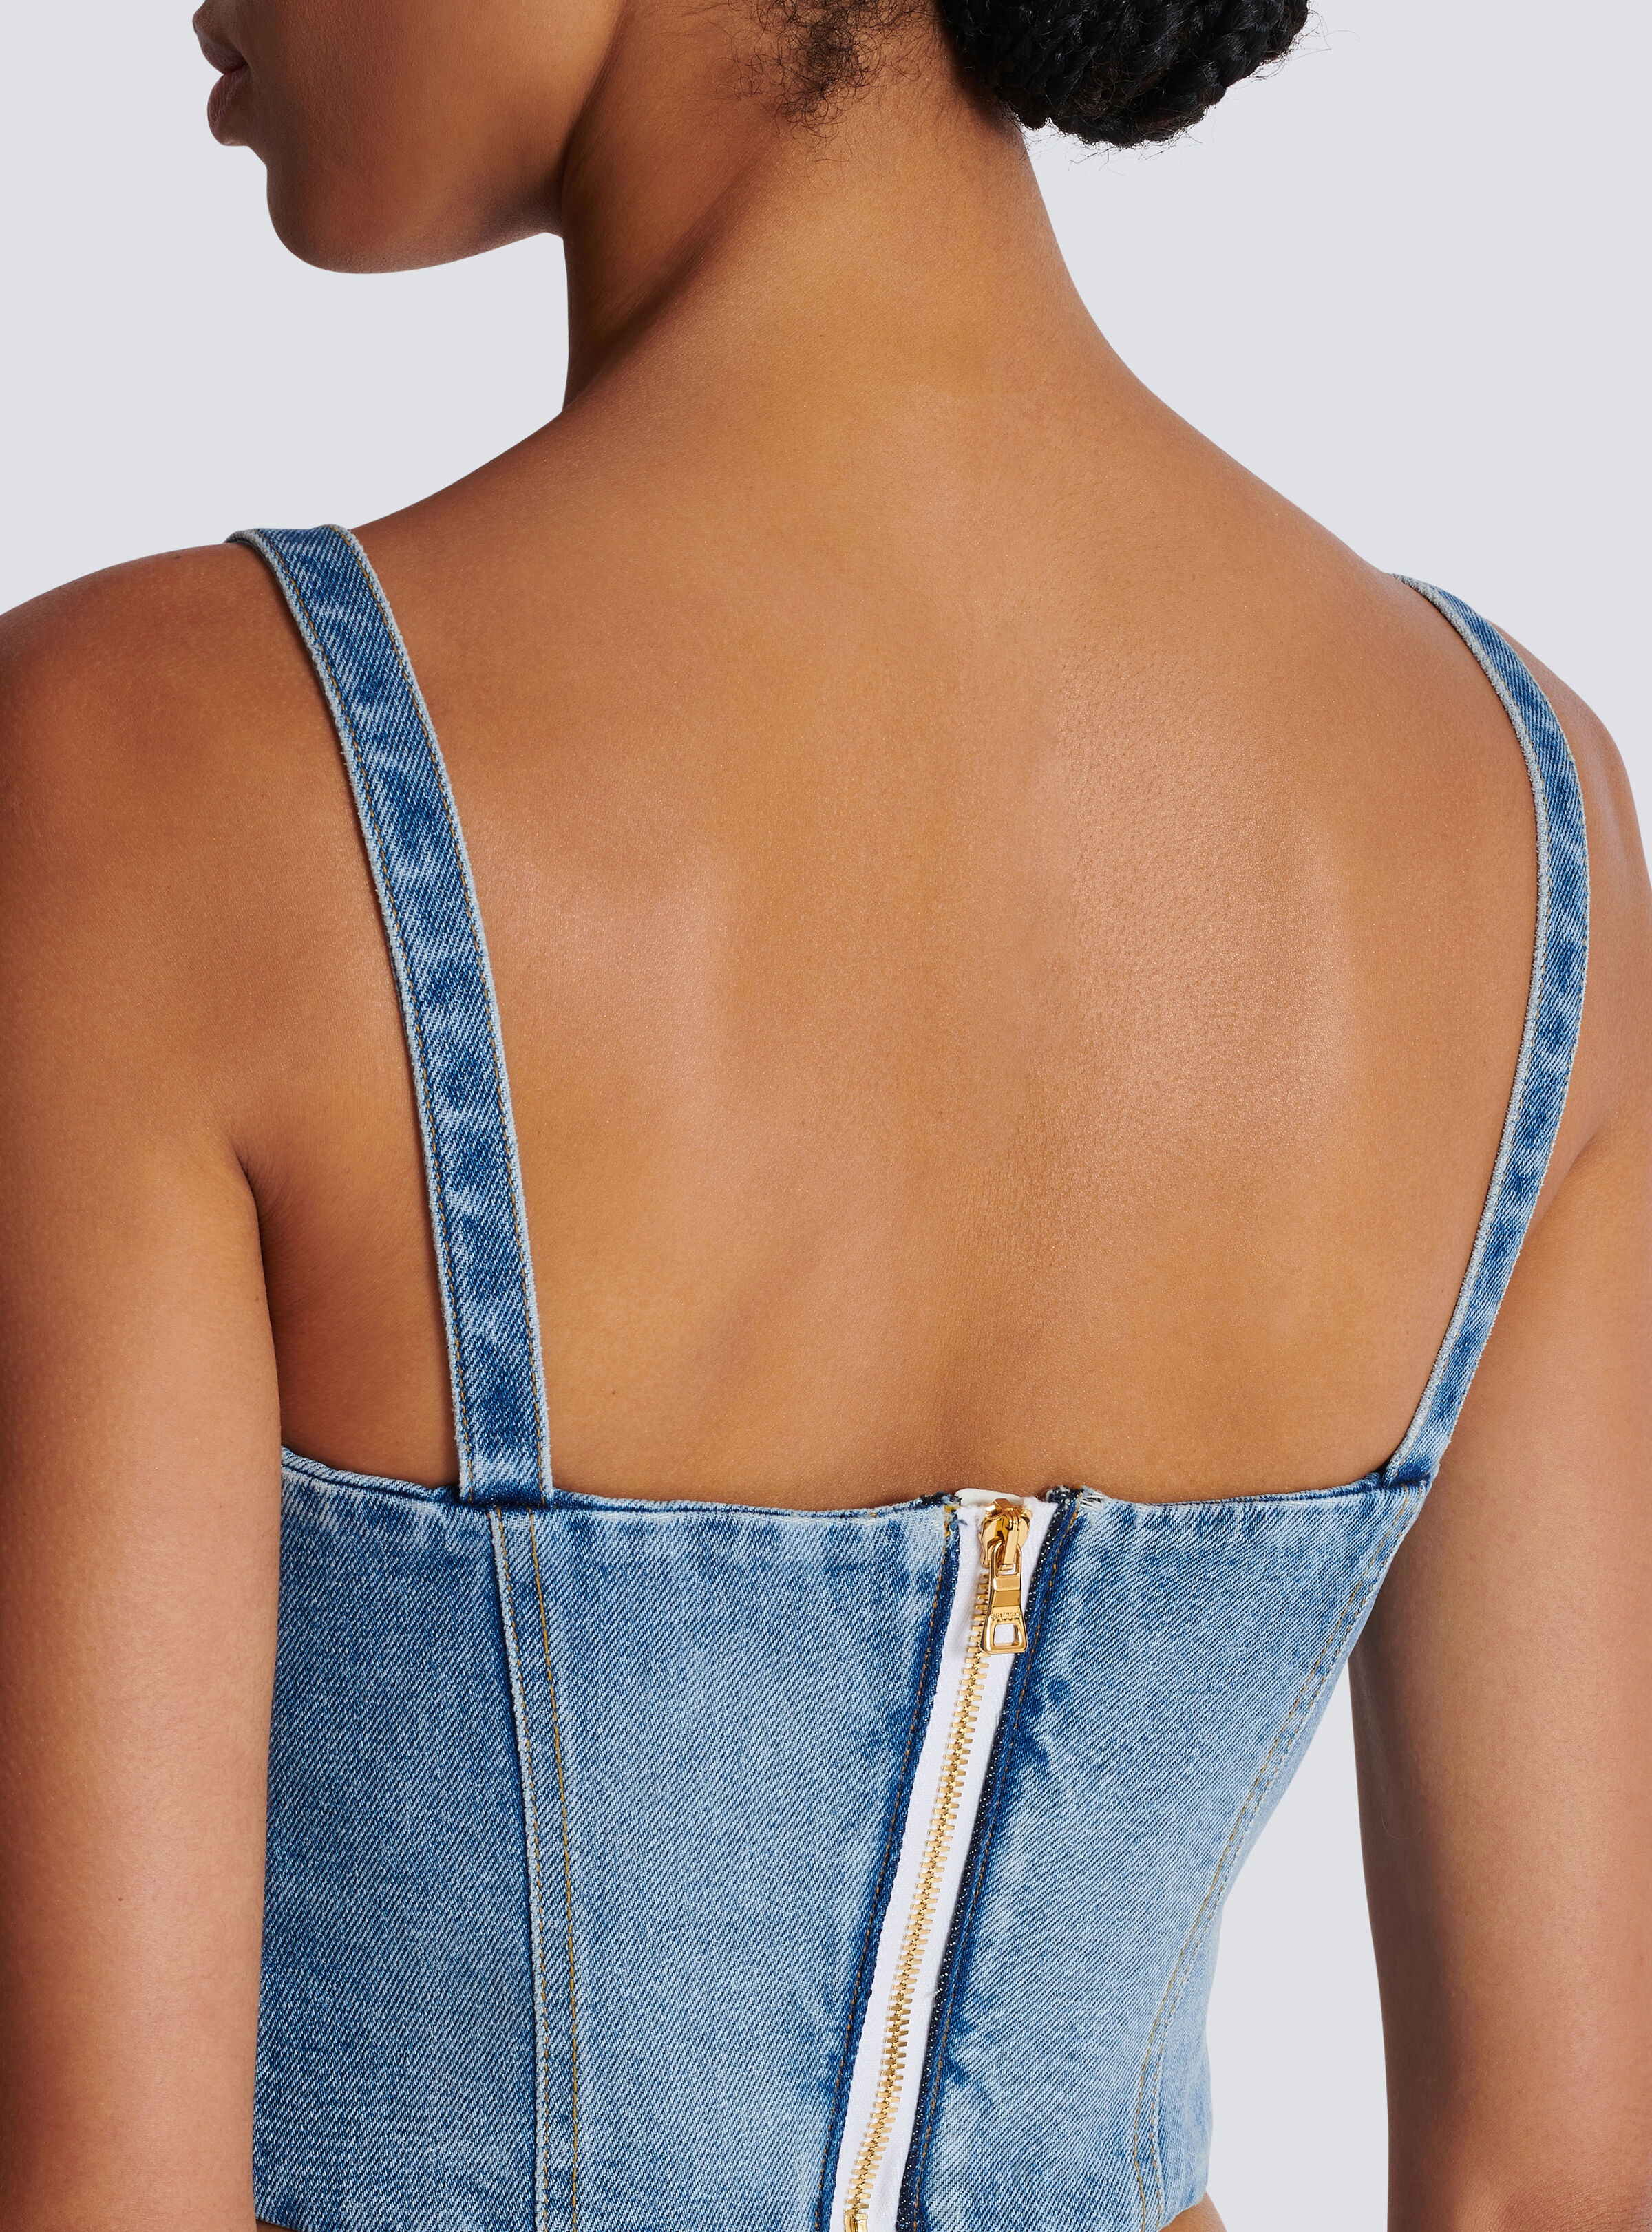 Denim top with thin straps - 6